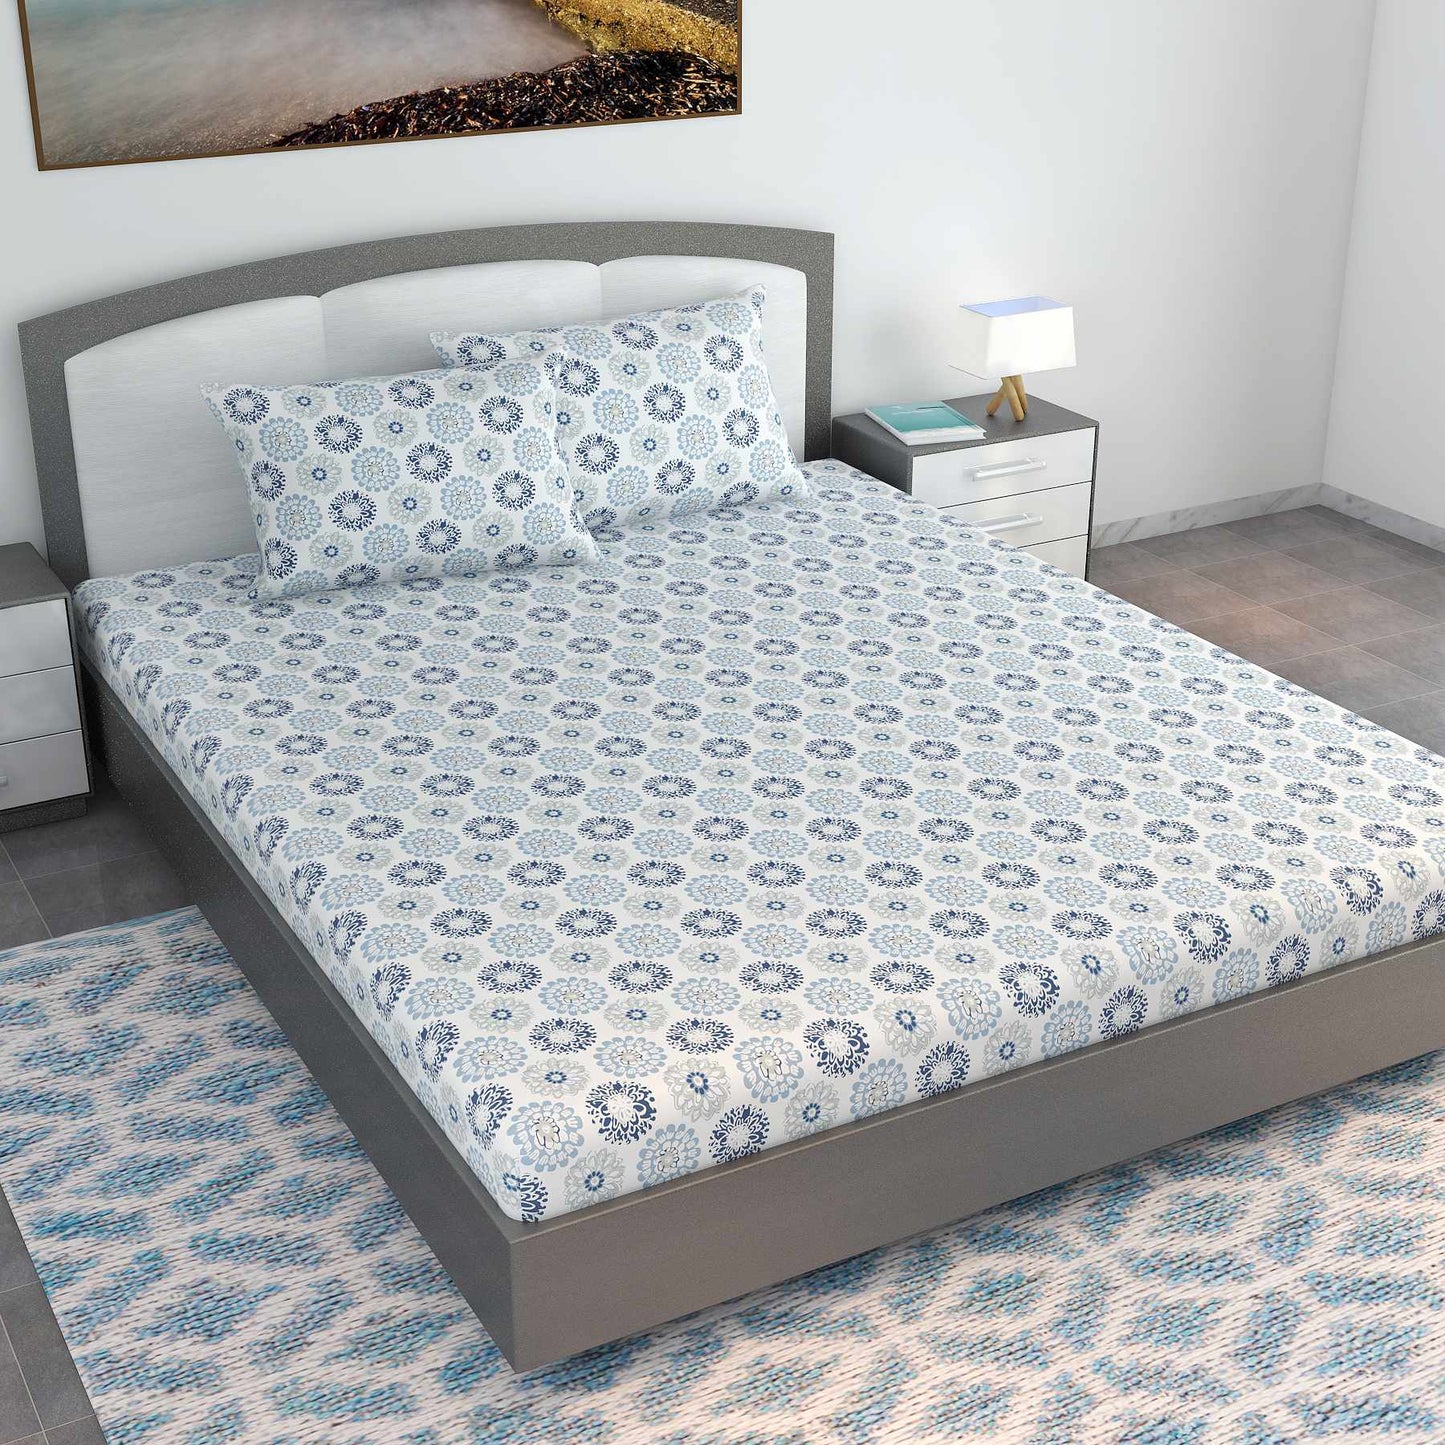 Dahlia Print Bedsheet For King Size Bed